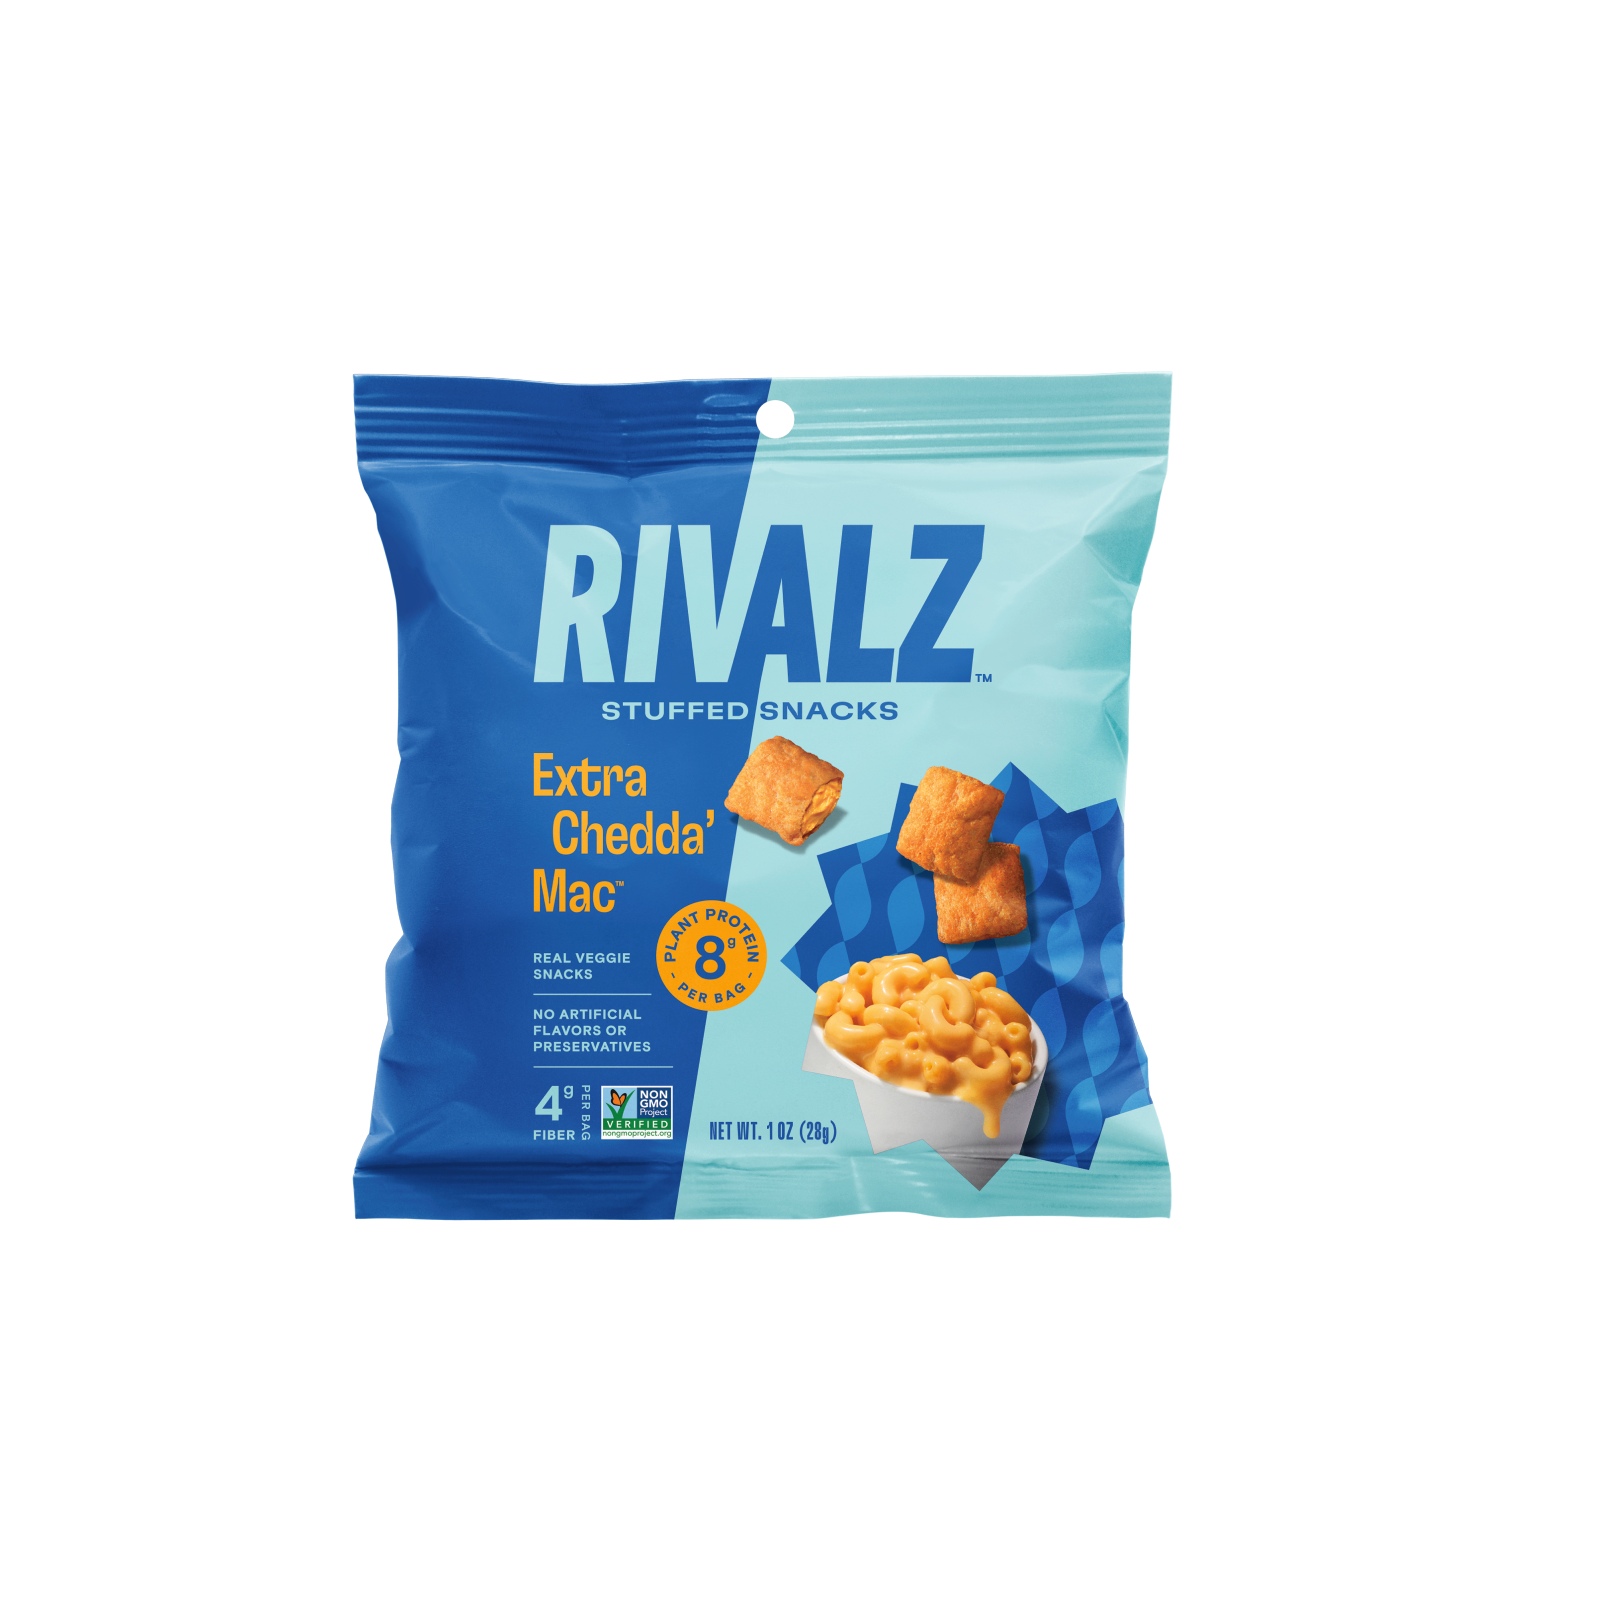 Rivalz Extra Chedda' Mac and Cheese stuffed veggie snacks, gluten-free and protein-packed